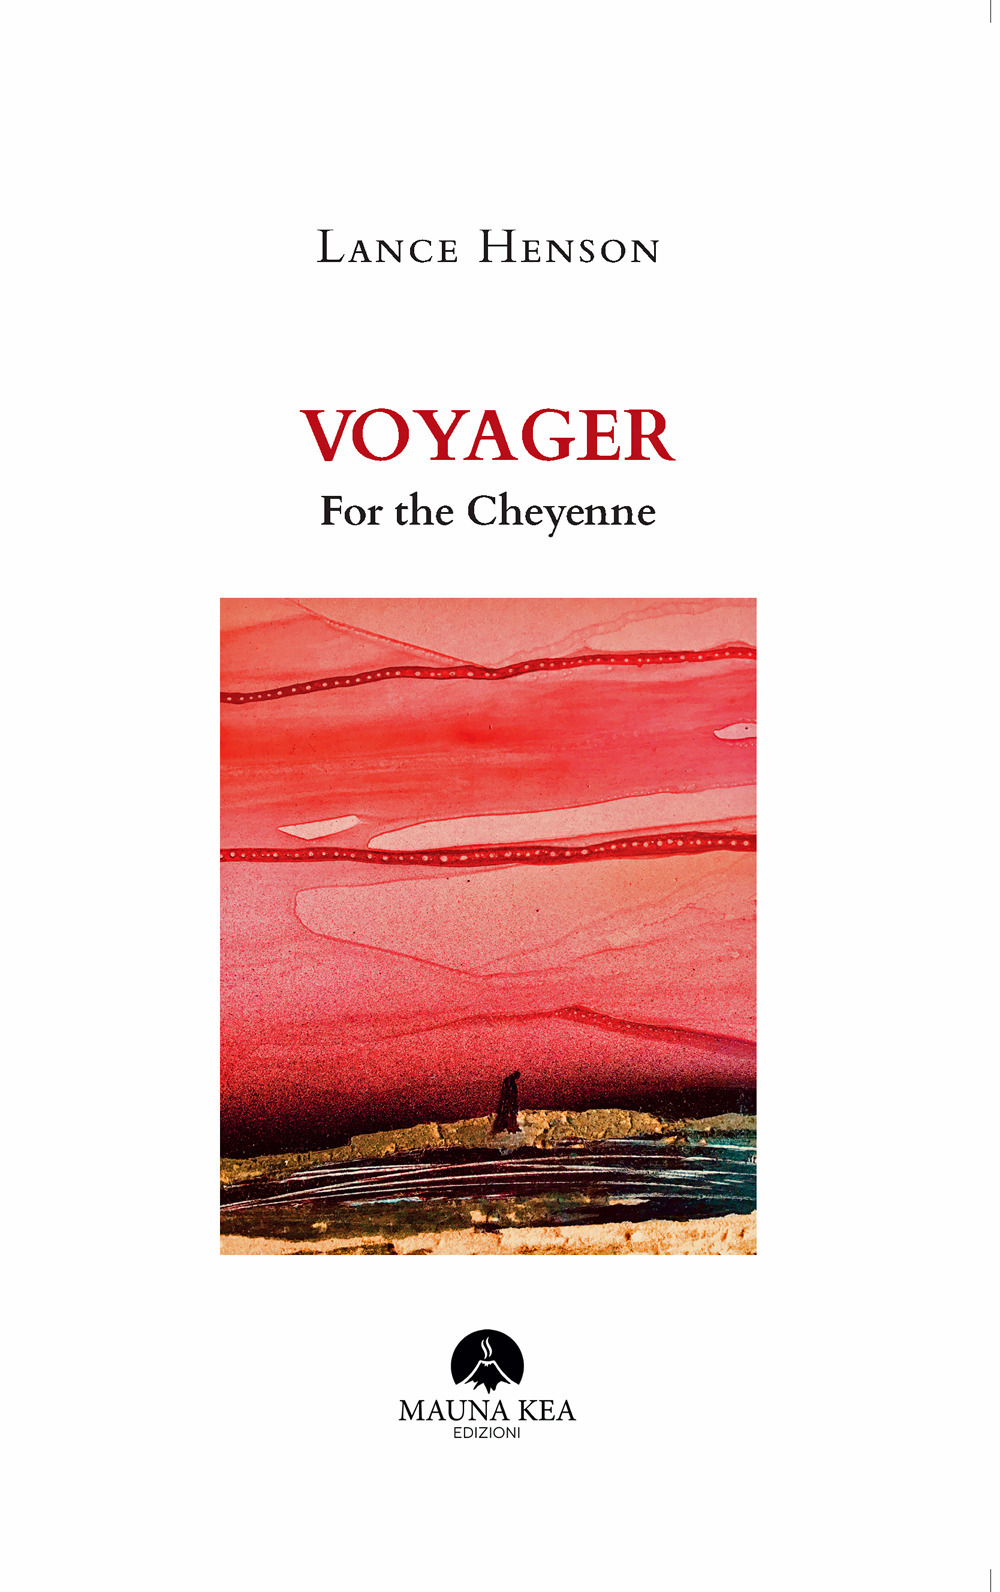 Voyager for the Cheyenne